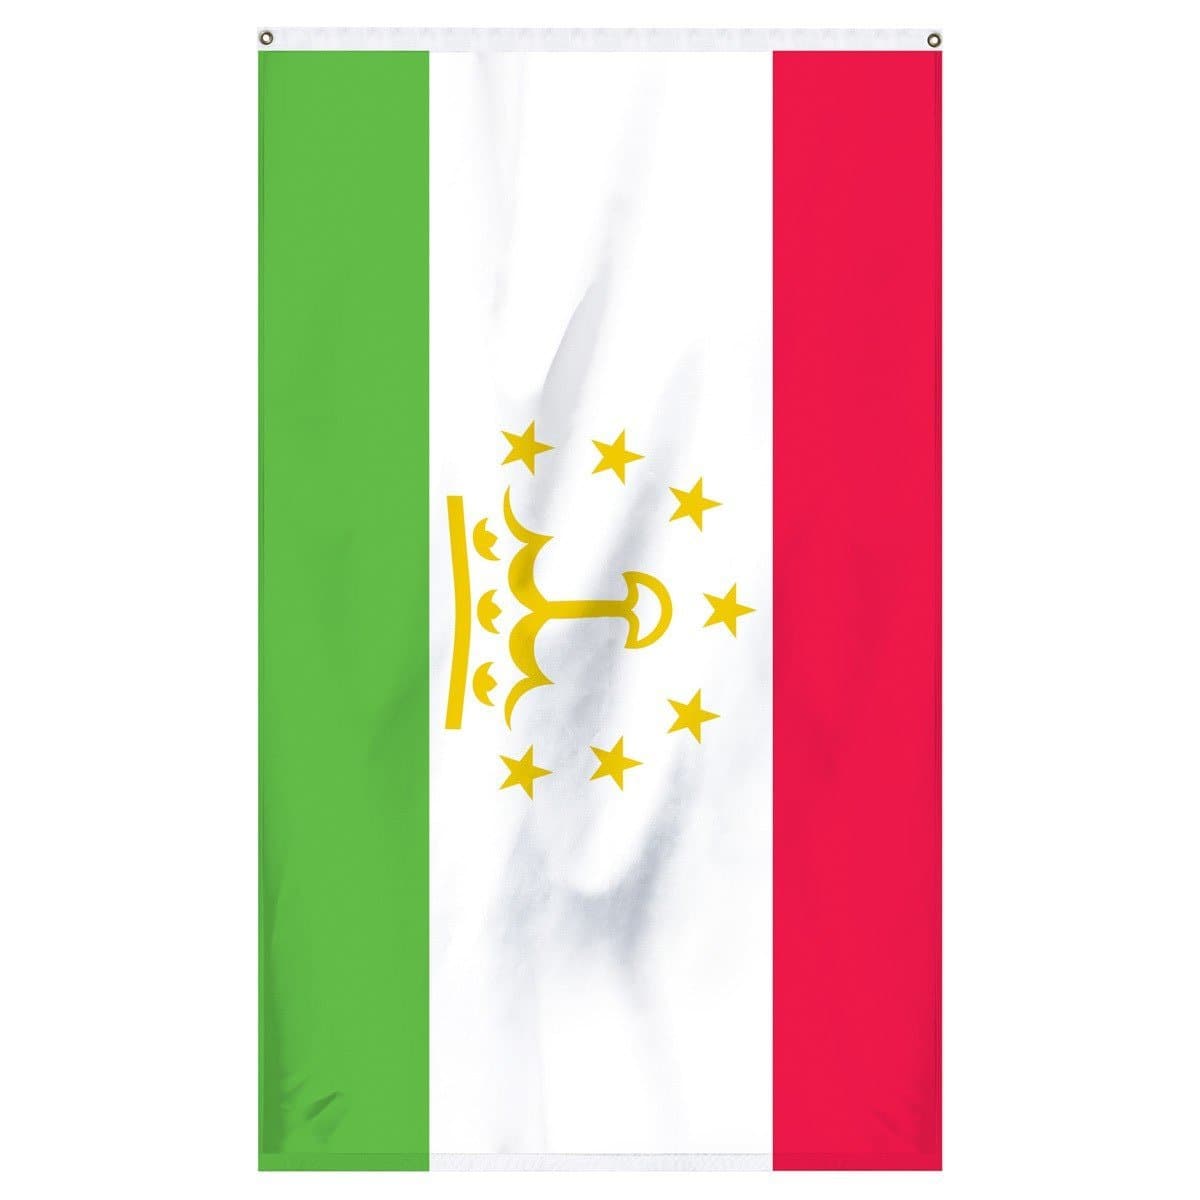 Tajikistan National Flag for sale to buy online from Atlantic Flag and Pole. Red, white, and green flag with 7 golden stars and a crown on a flag,